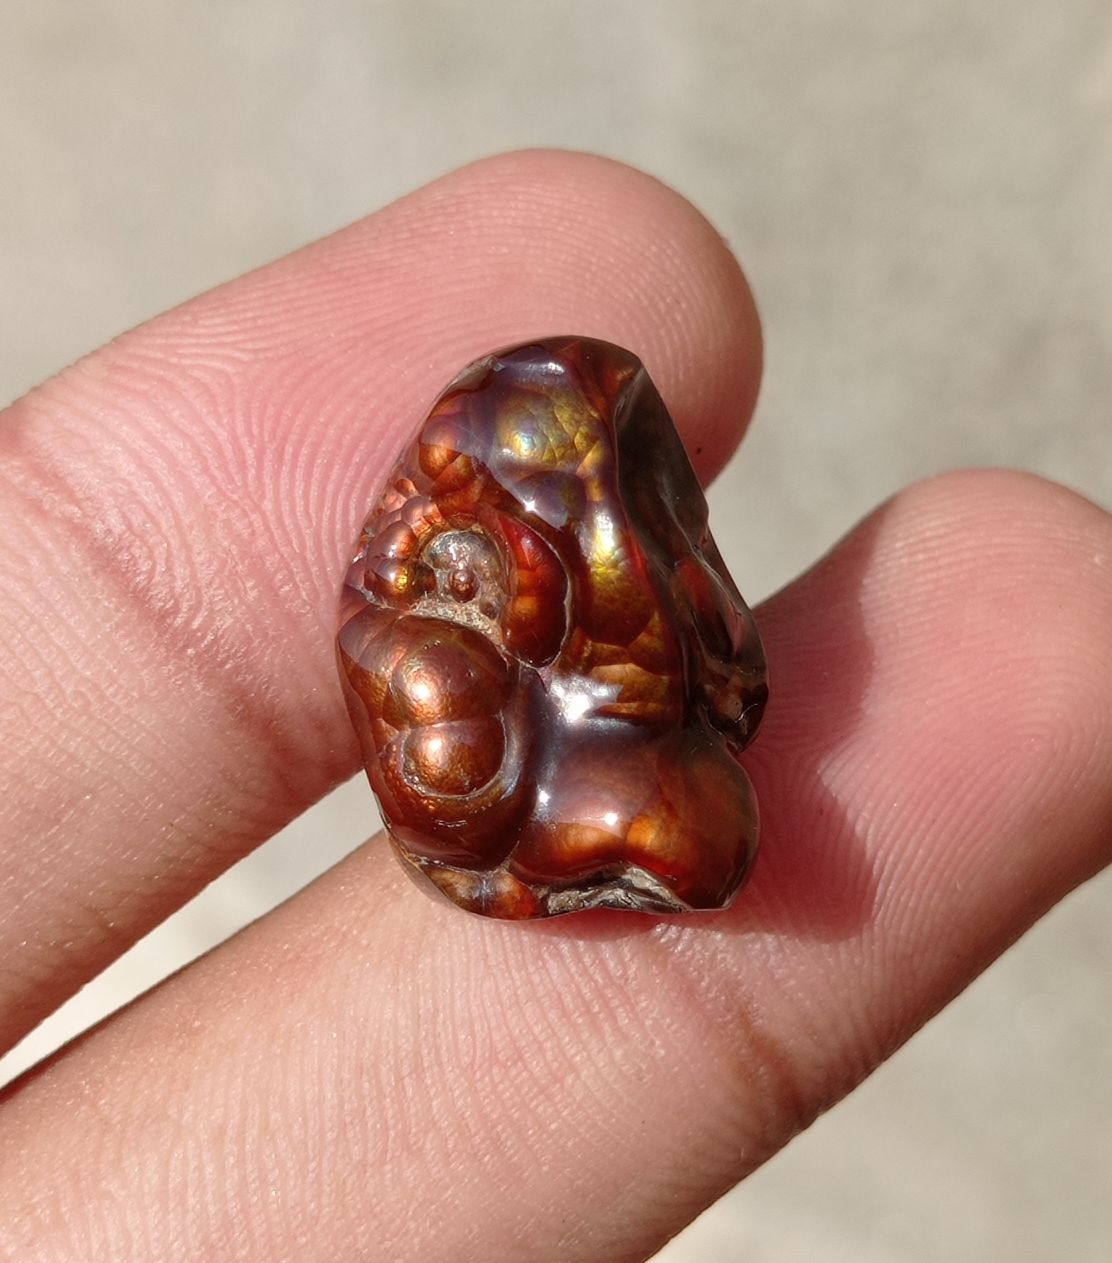 17.8ct Carved Fire Agate, Rare Fire Agate, Aatshi Aqeeq, Suitable For Pendant - Dimensions 20x15x10mm